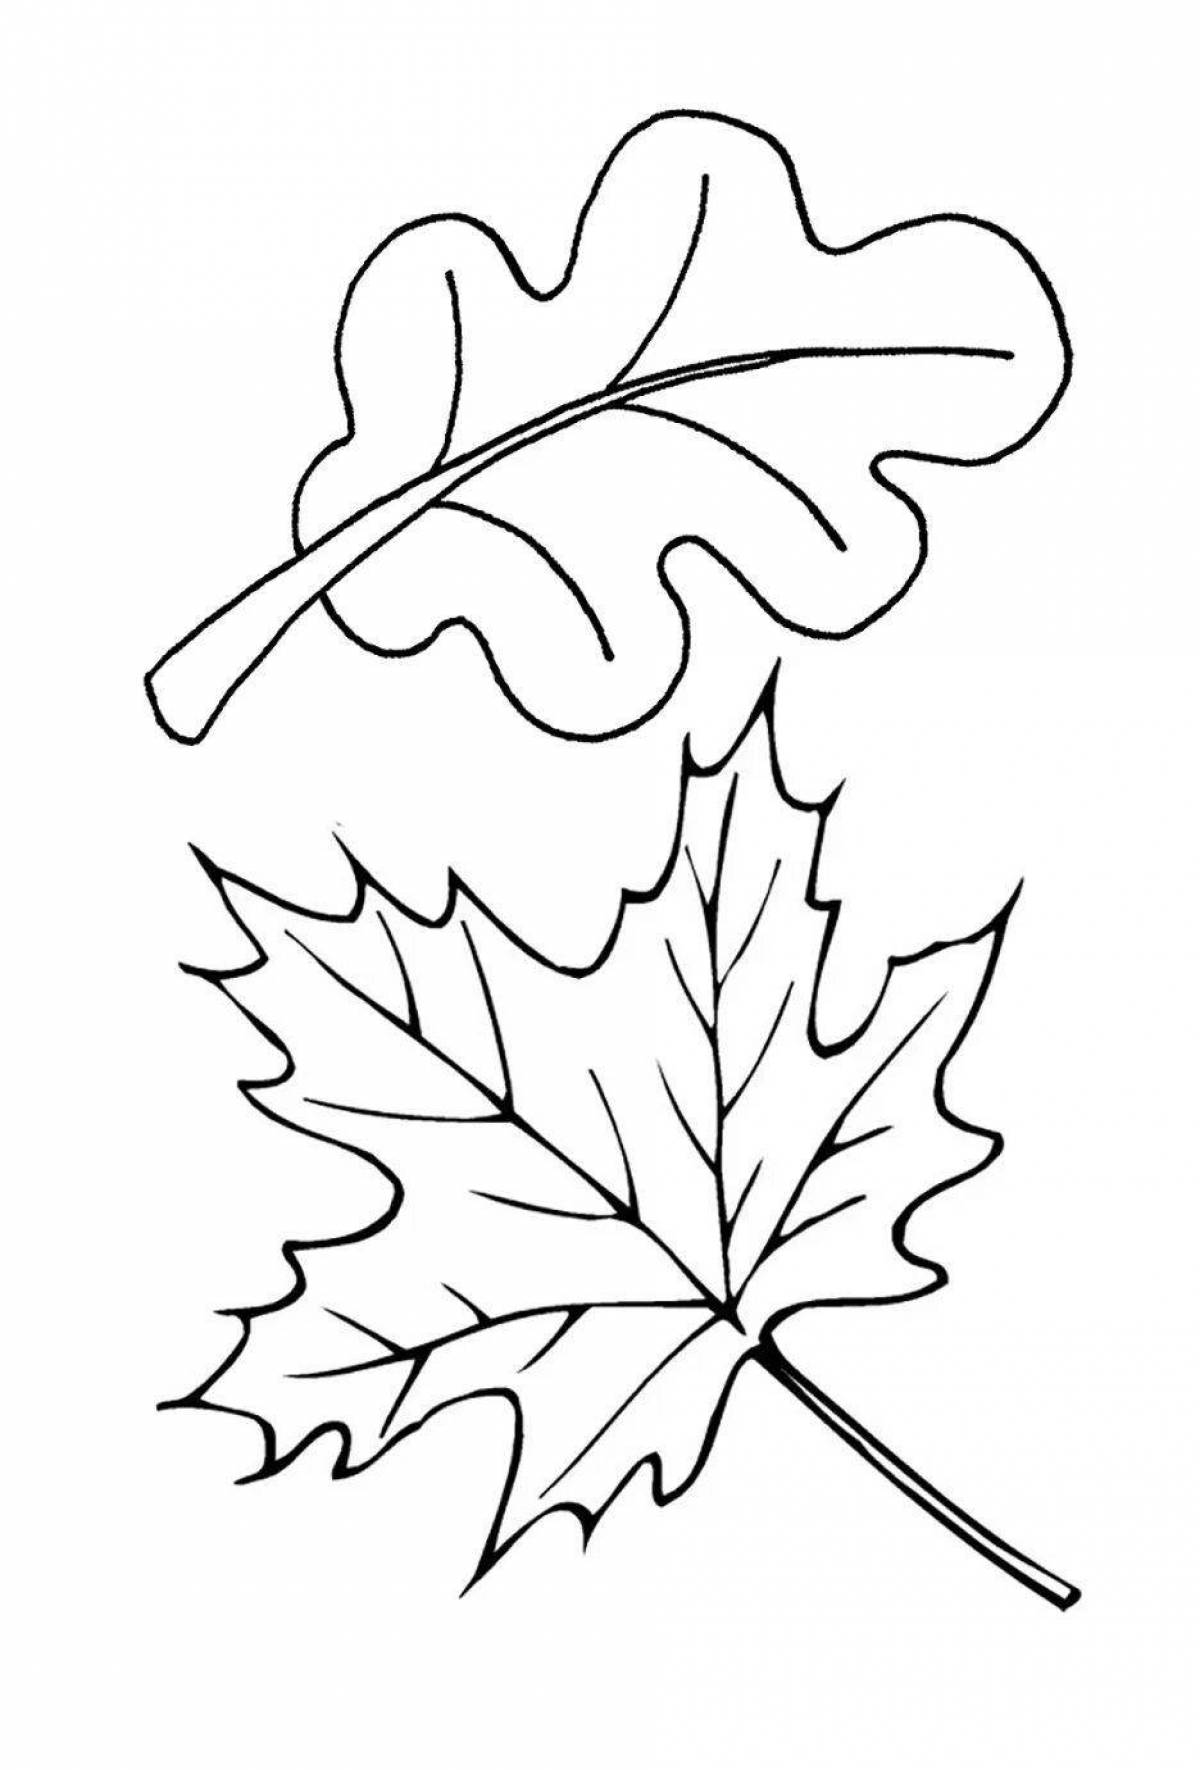 Luxury leaves coloring book for kids